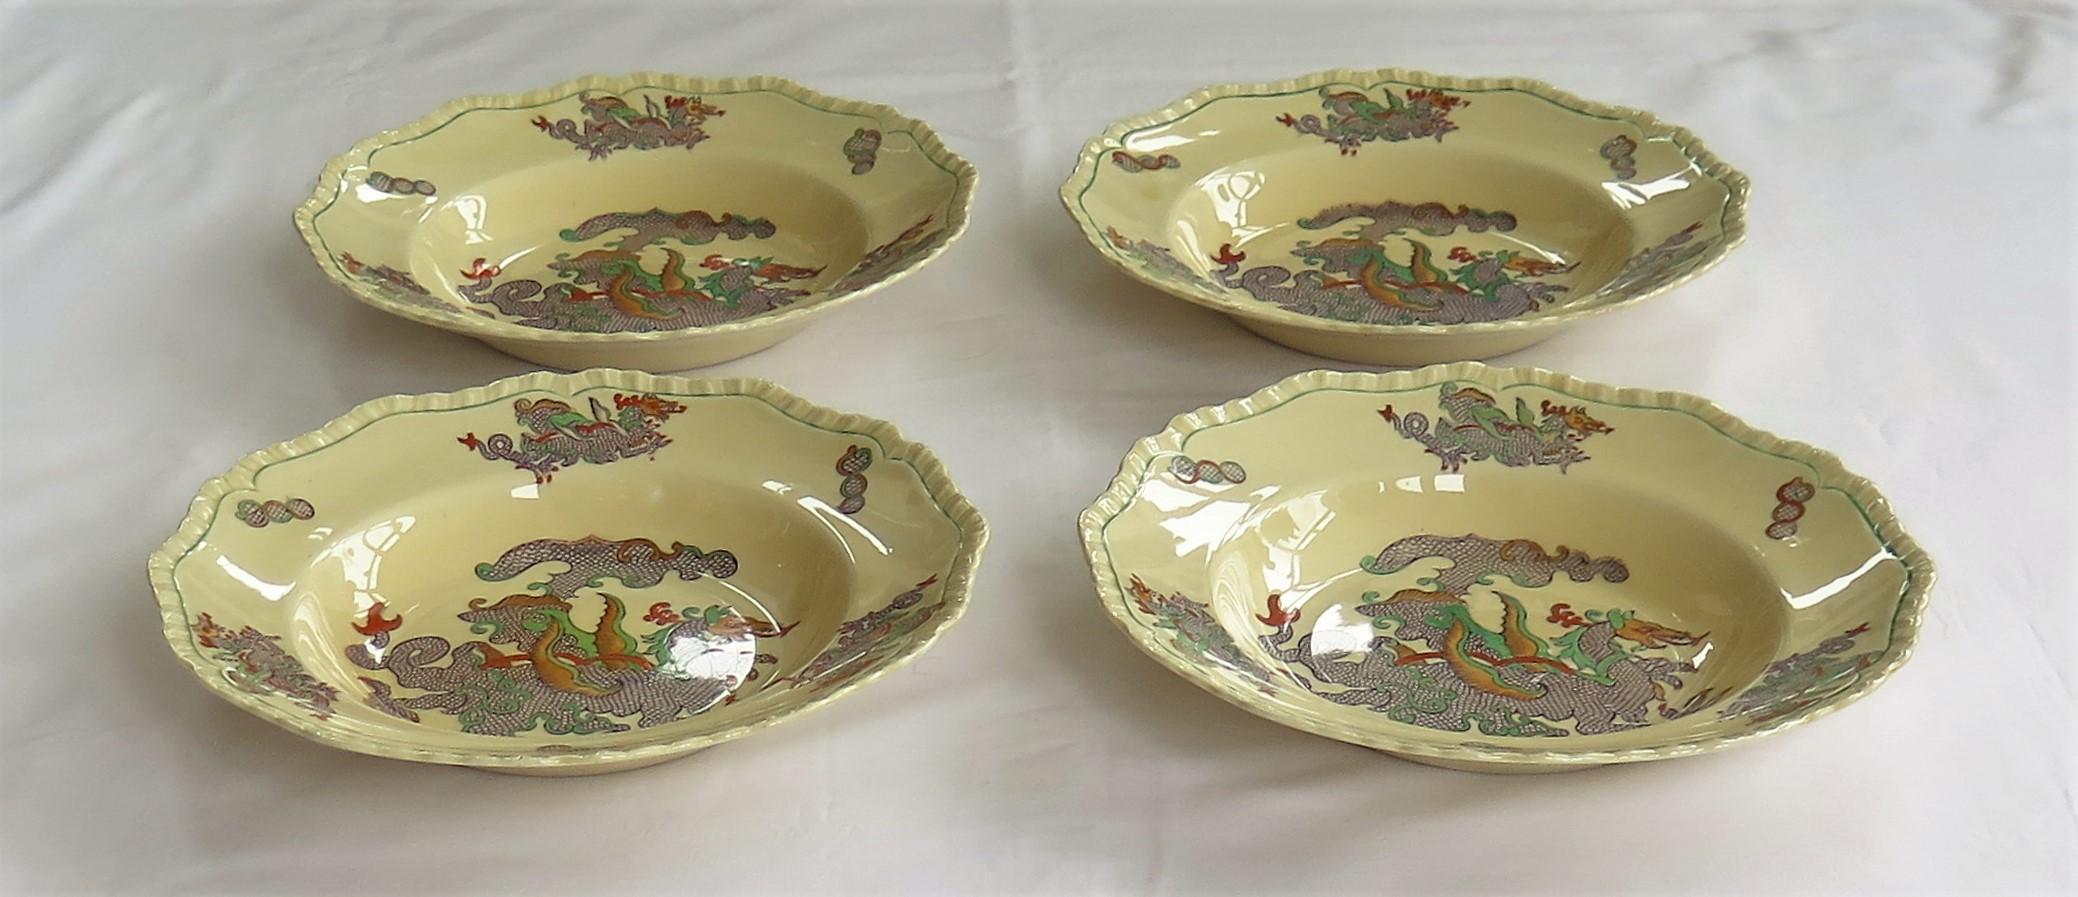 Hand-Painted Set of FOUR Masons Ironstone Large Bowls in Chinese Dragon Pattern, Circa 1900 For Sale